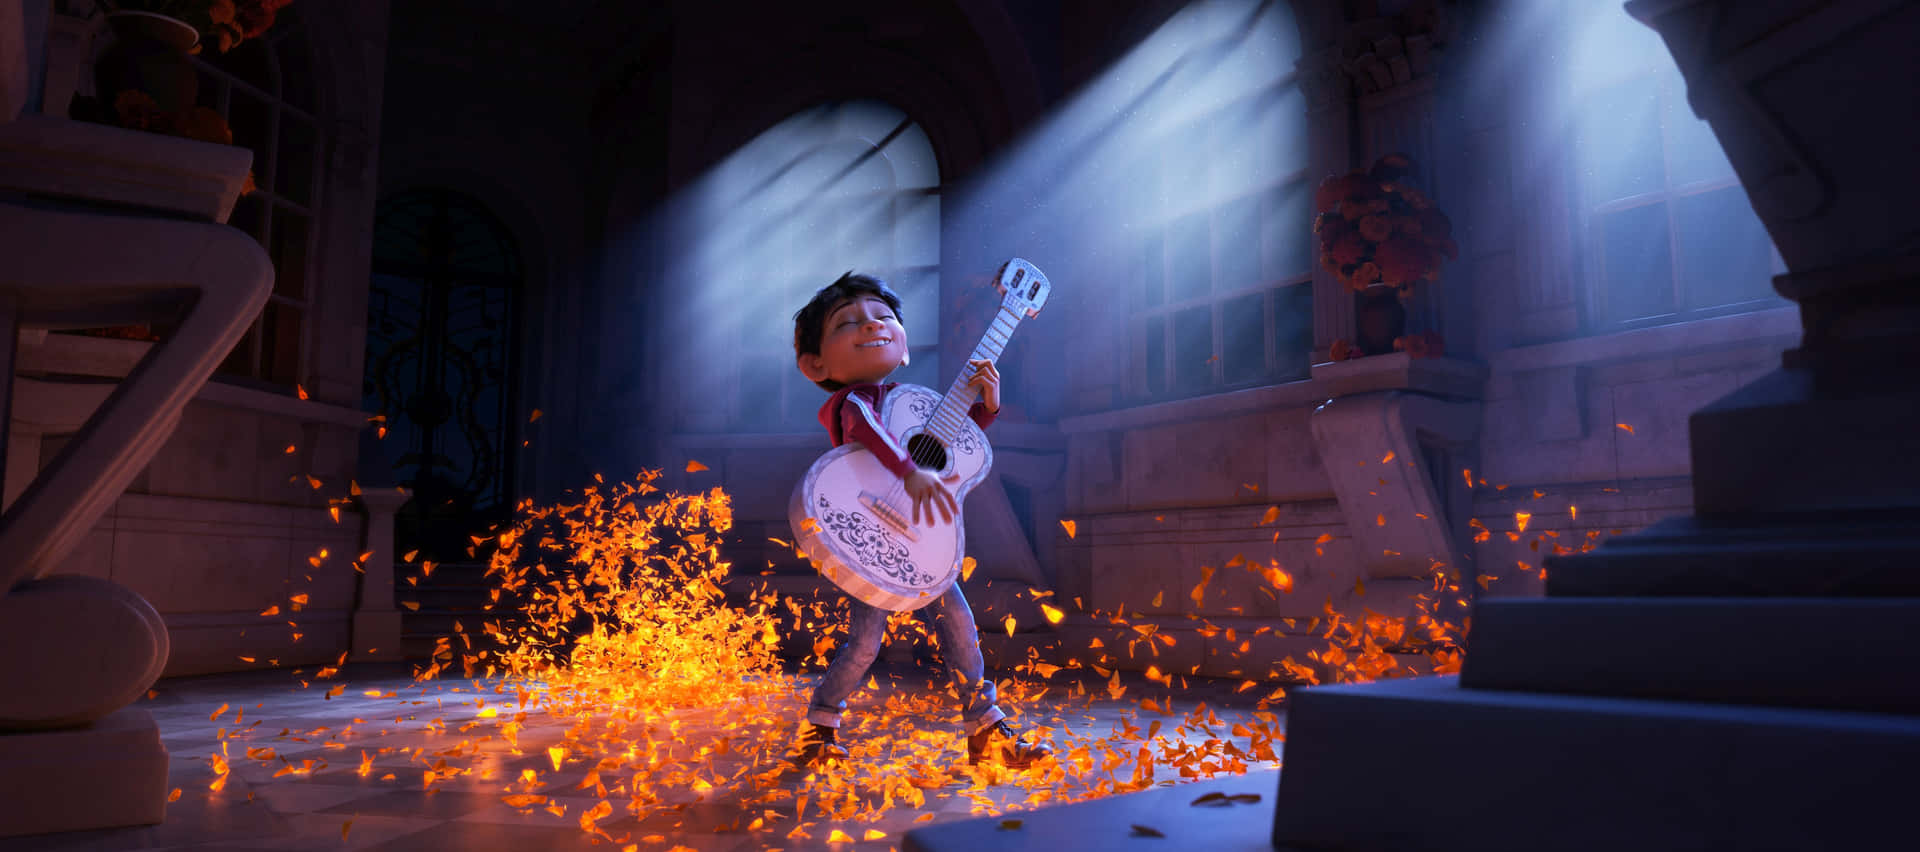 An enchanting scene from Disney's Coco Wallpaper